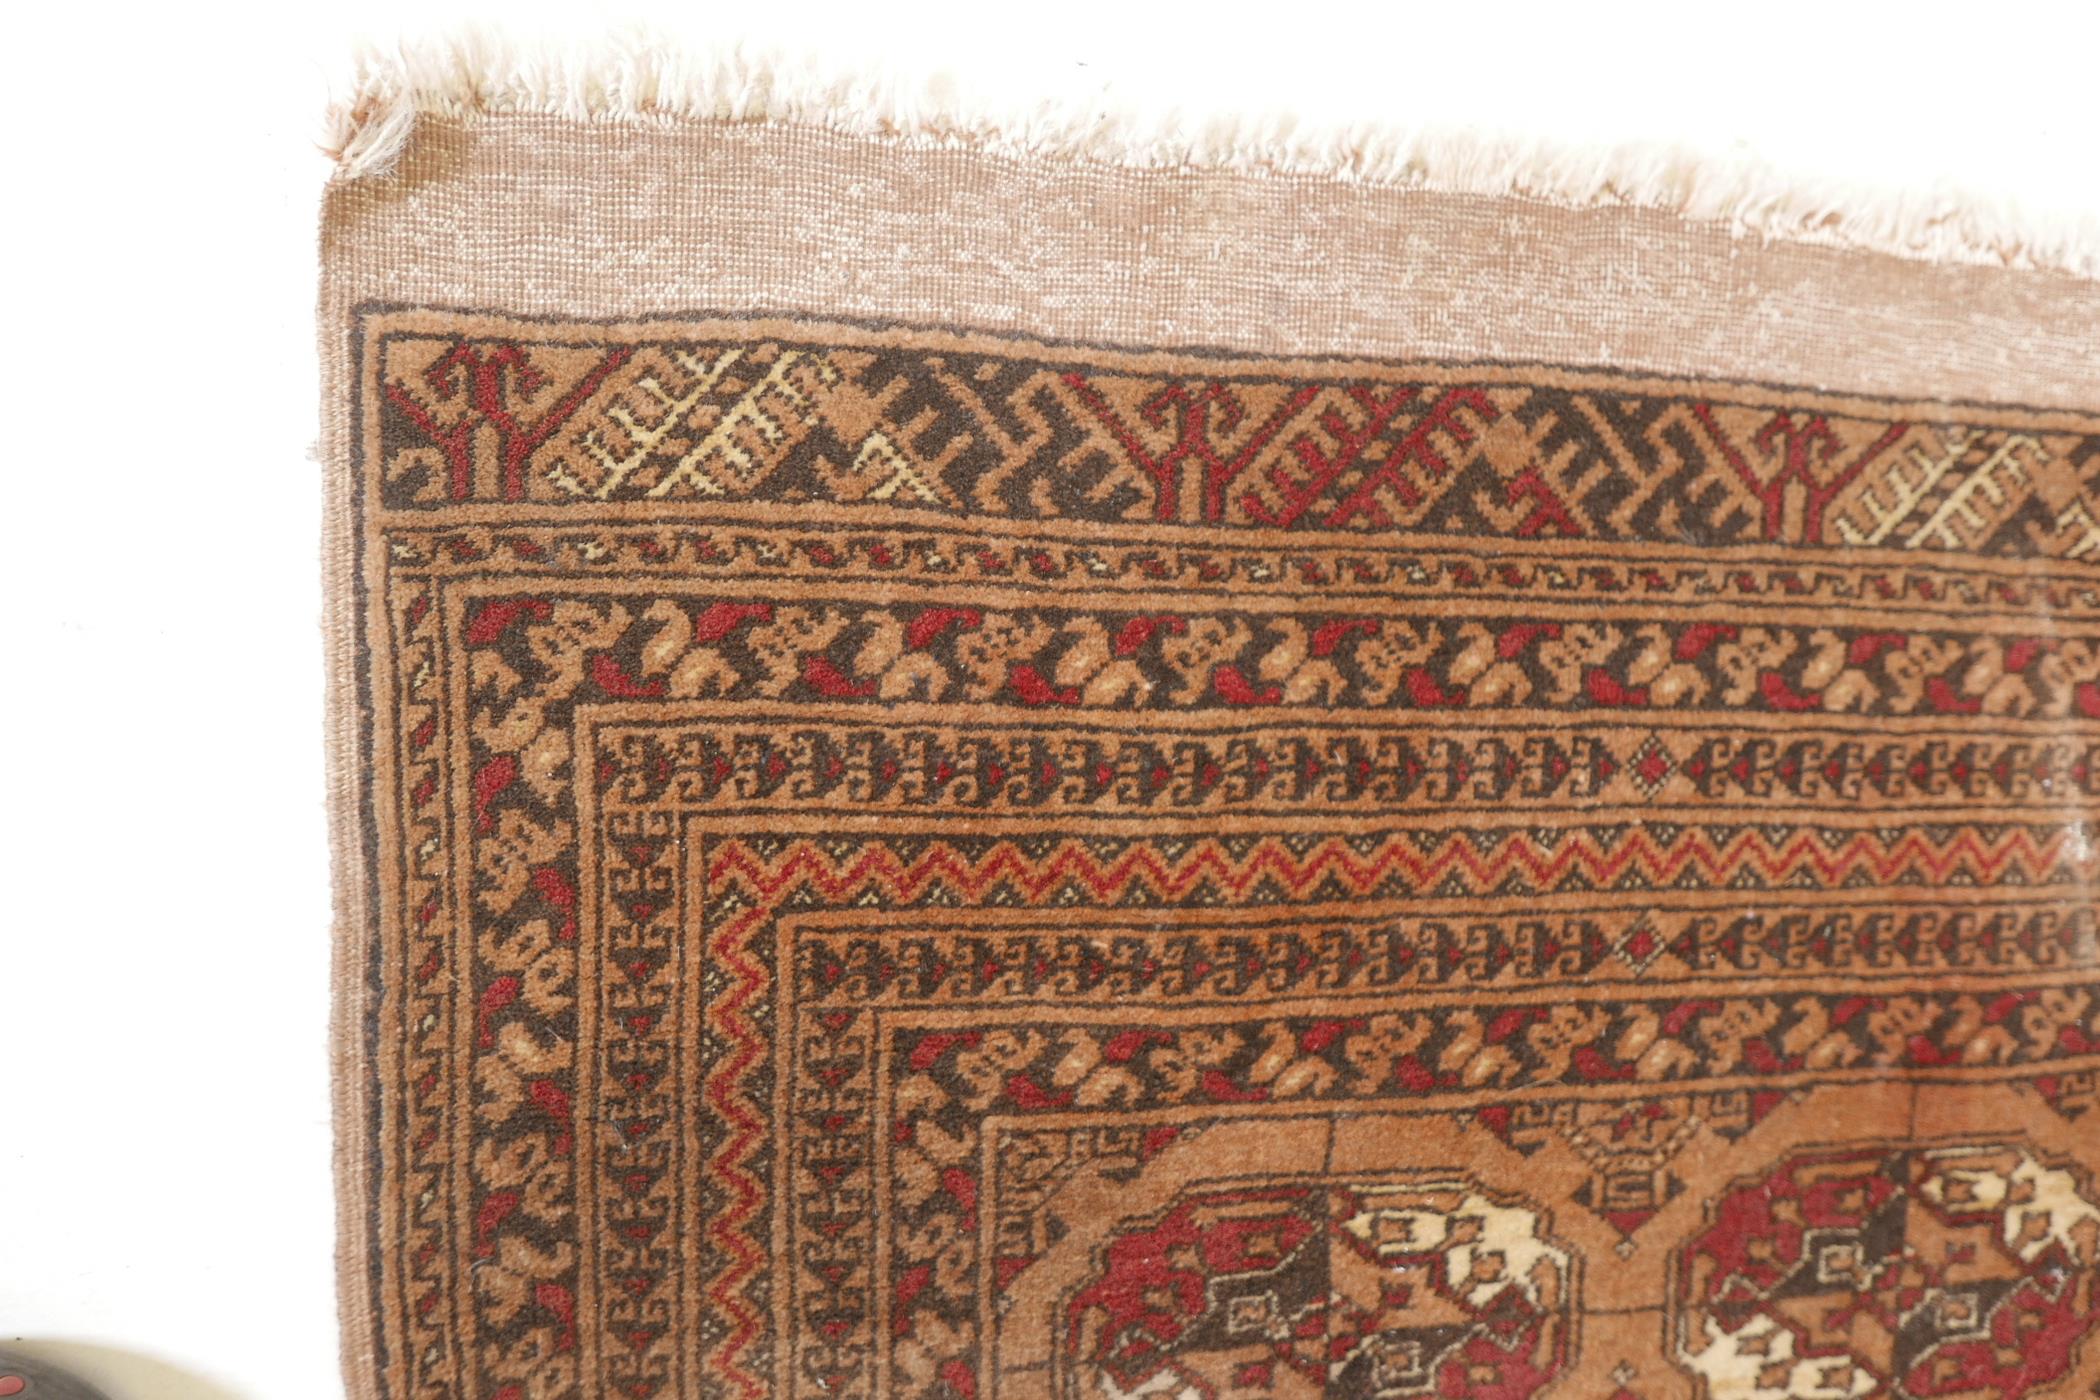 A brown ground Bokhara rug, 33½" x 53" - Image 3 of 4